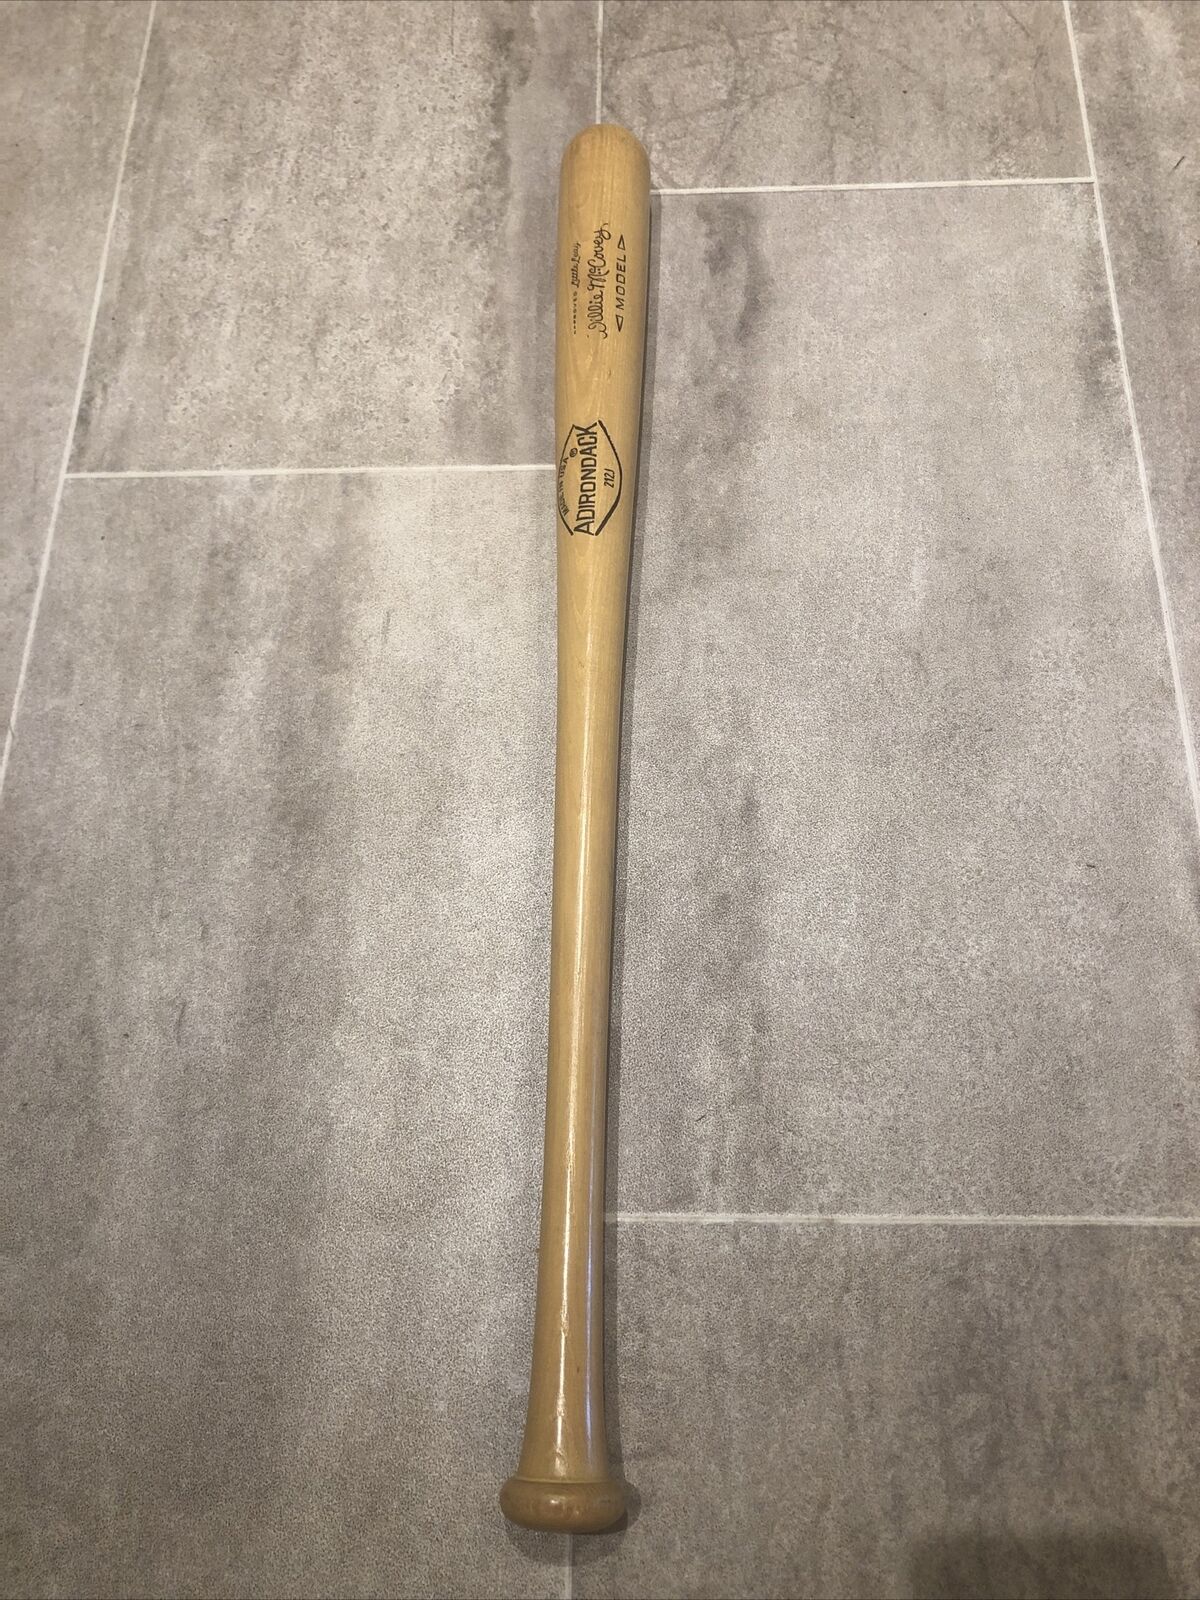 Vtg 60s Willie Mccovey Adirondack Little League Model Bat *29 In* Exceptional!